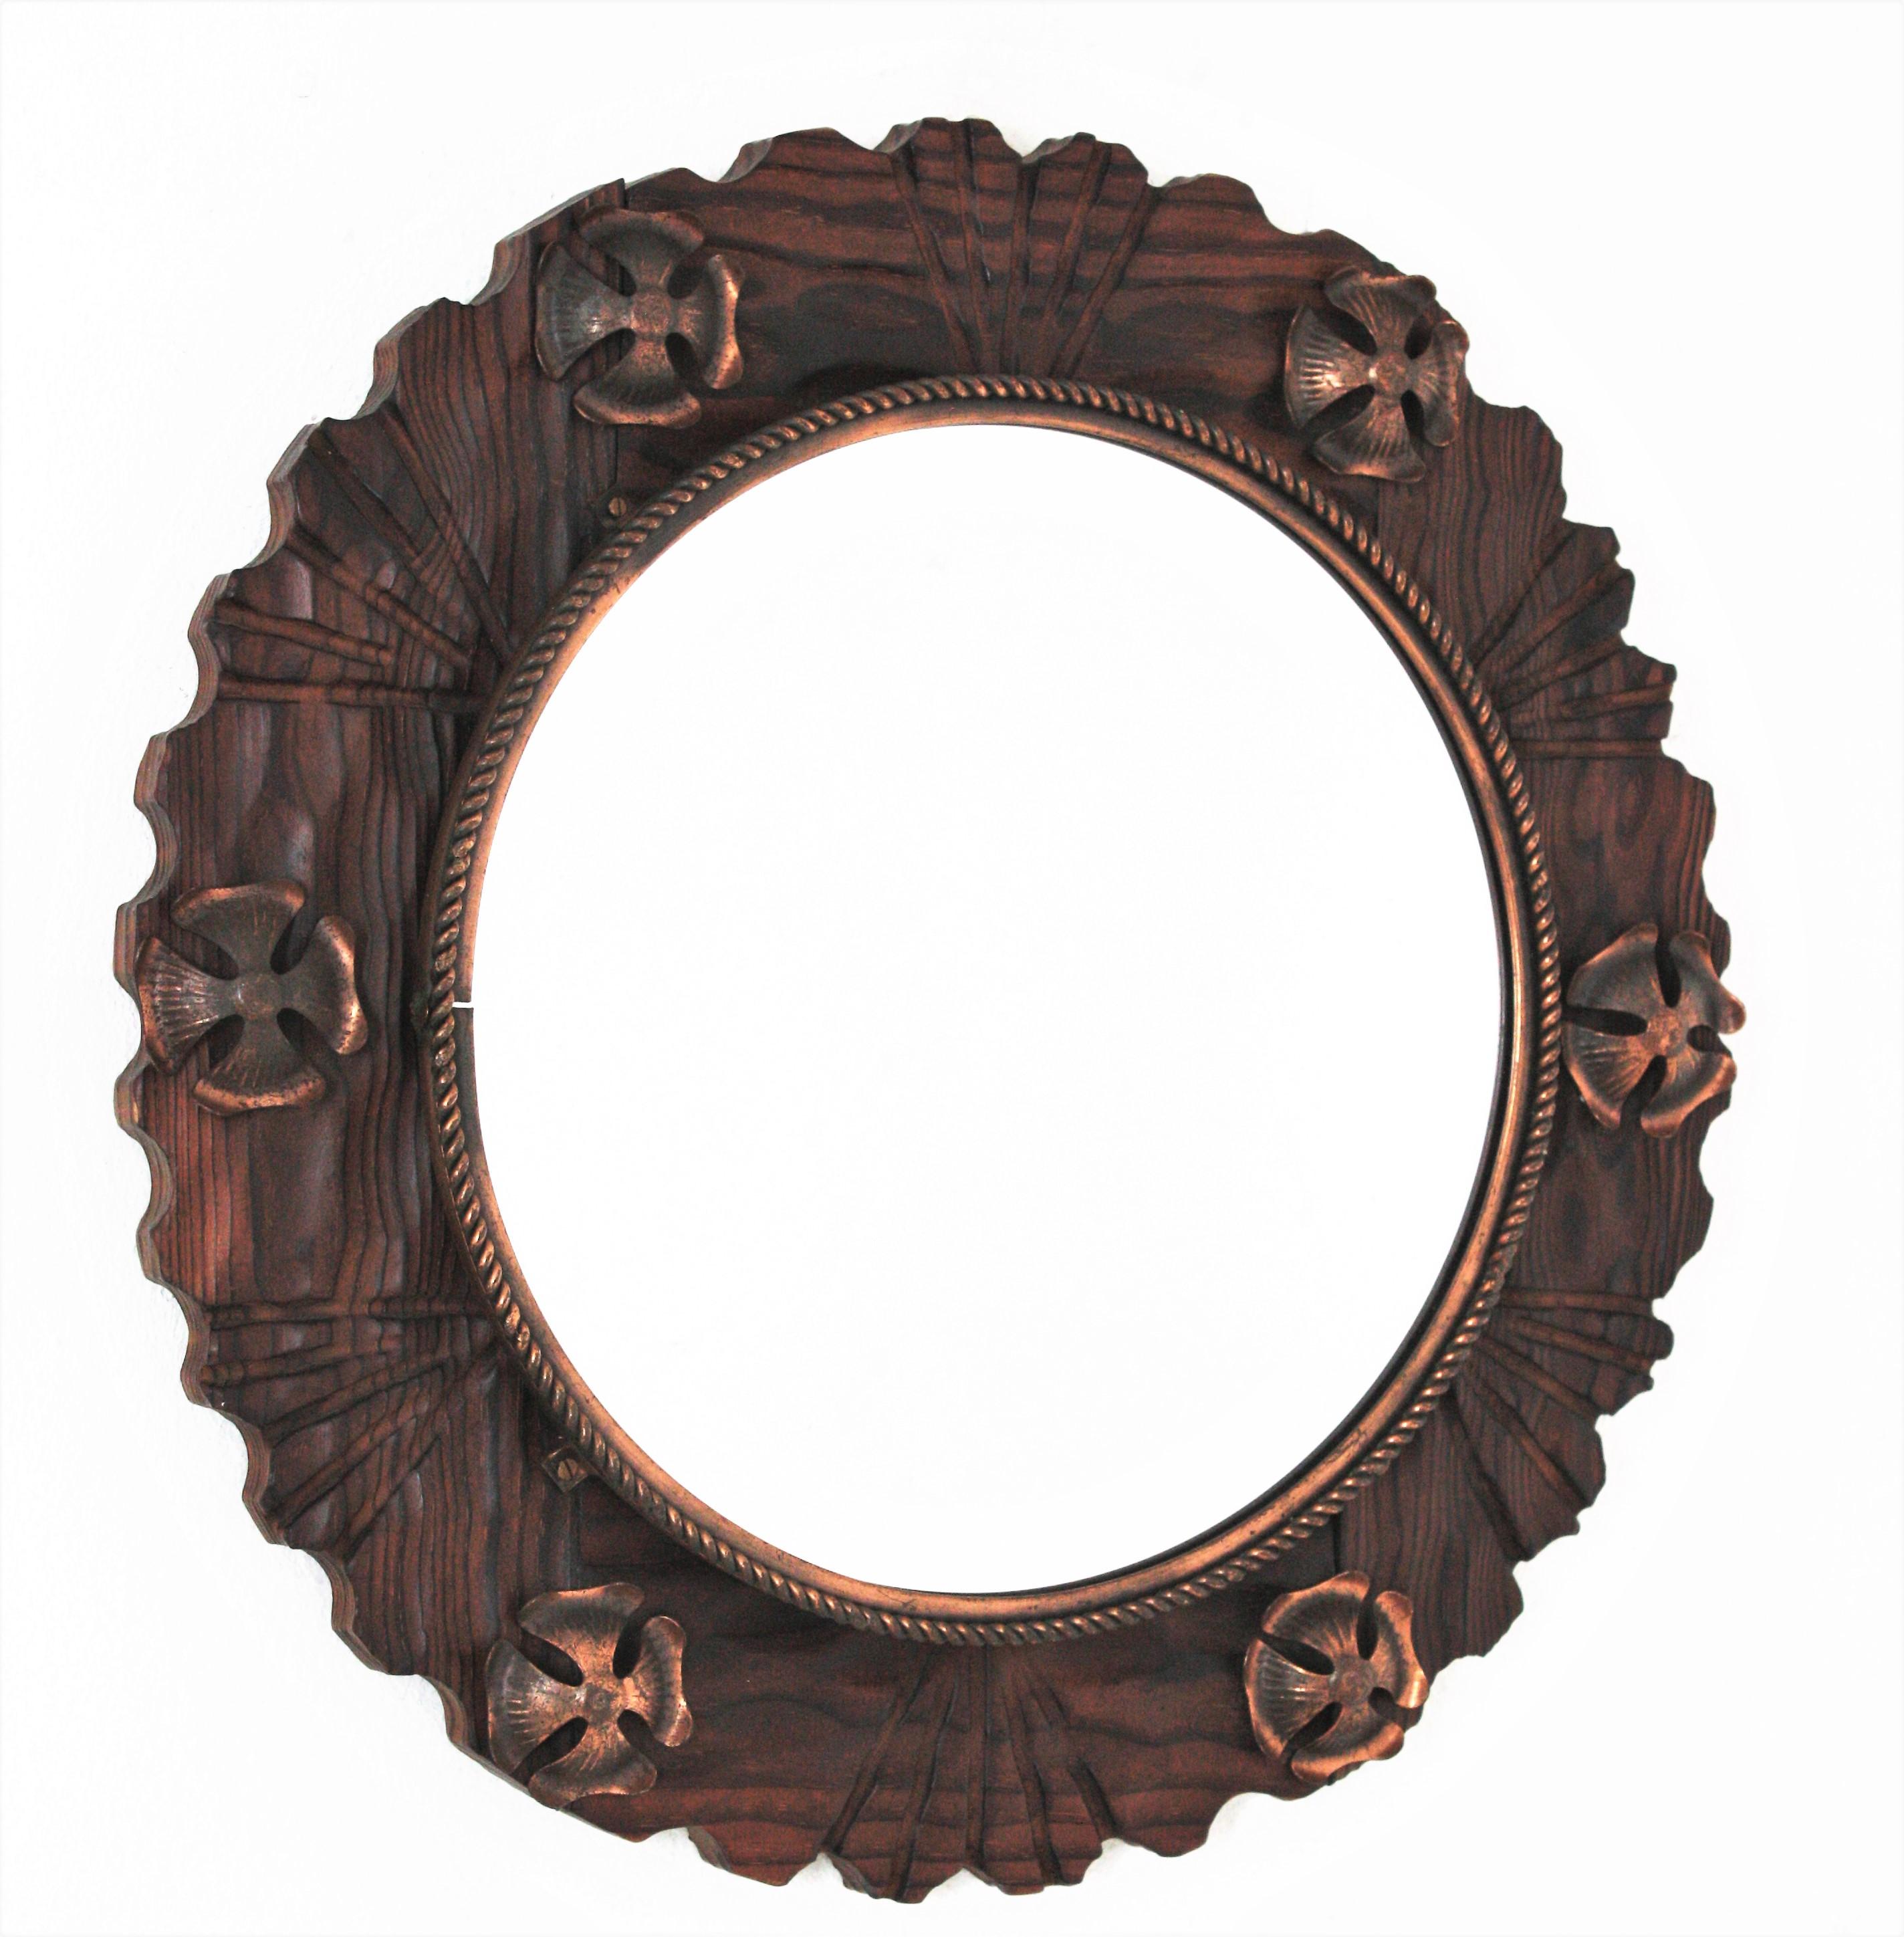 Hand carved pine wood round wall mirror with copper flower details, Spain, 1940s.
This wall mirror features a wooden scalloped frame surrounding a central round glass with a twisted copper pattern. Turned wood details and stripes decorations as